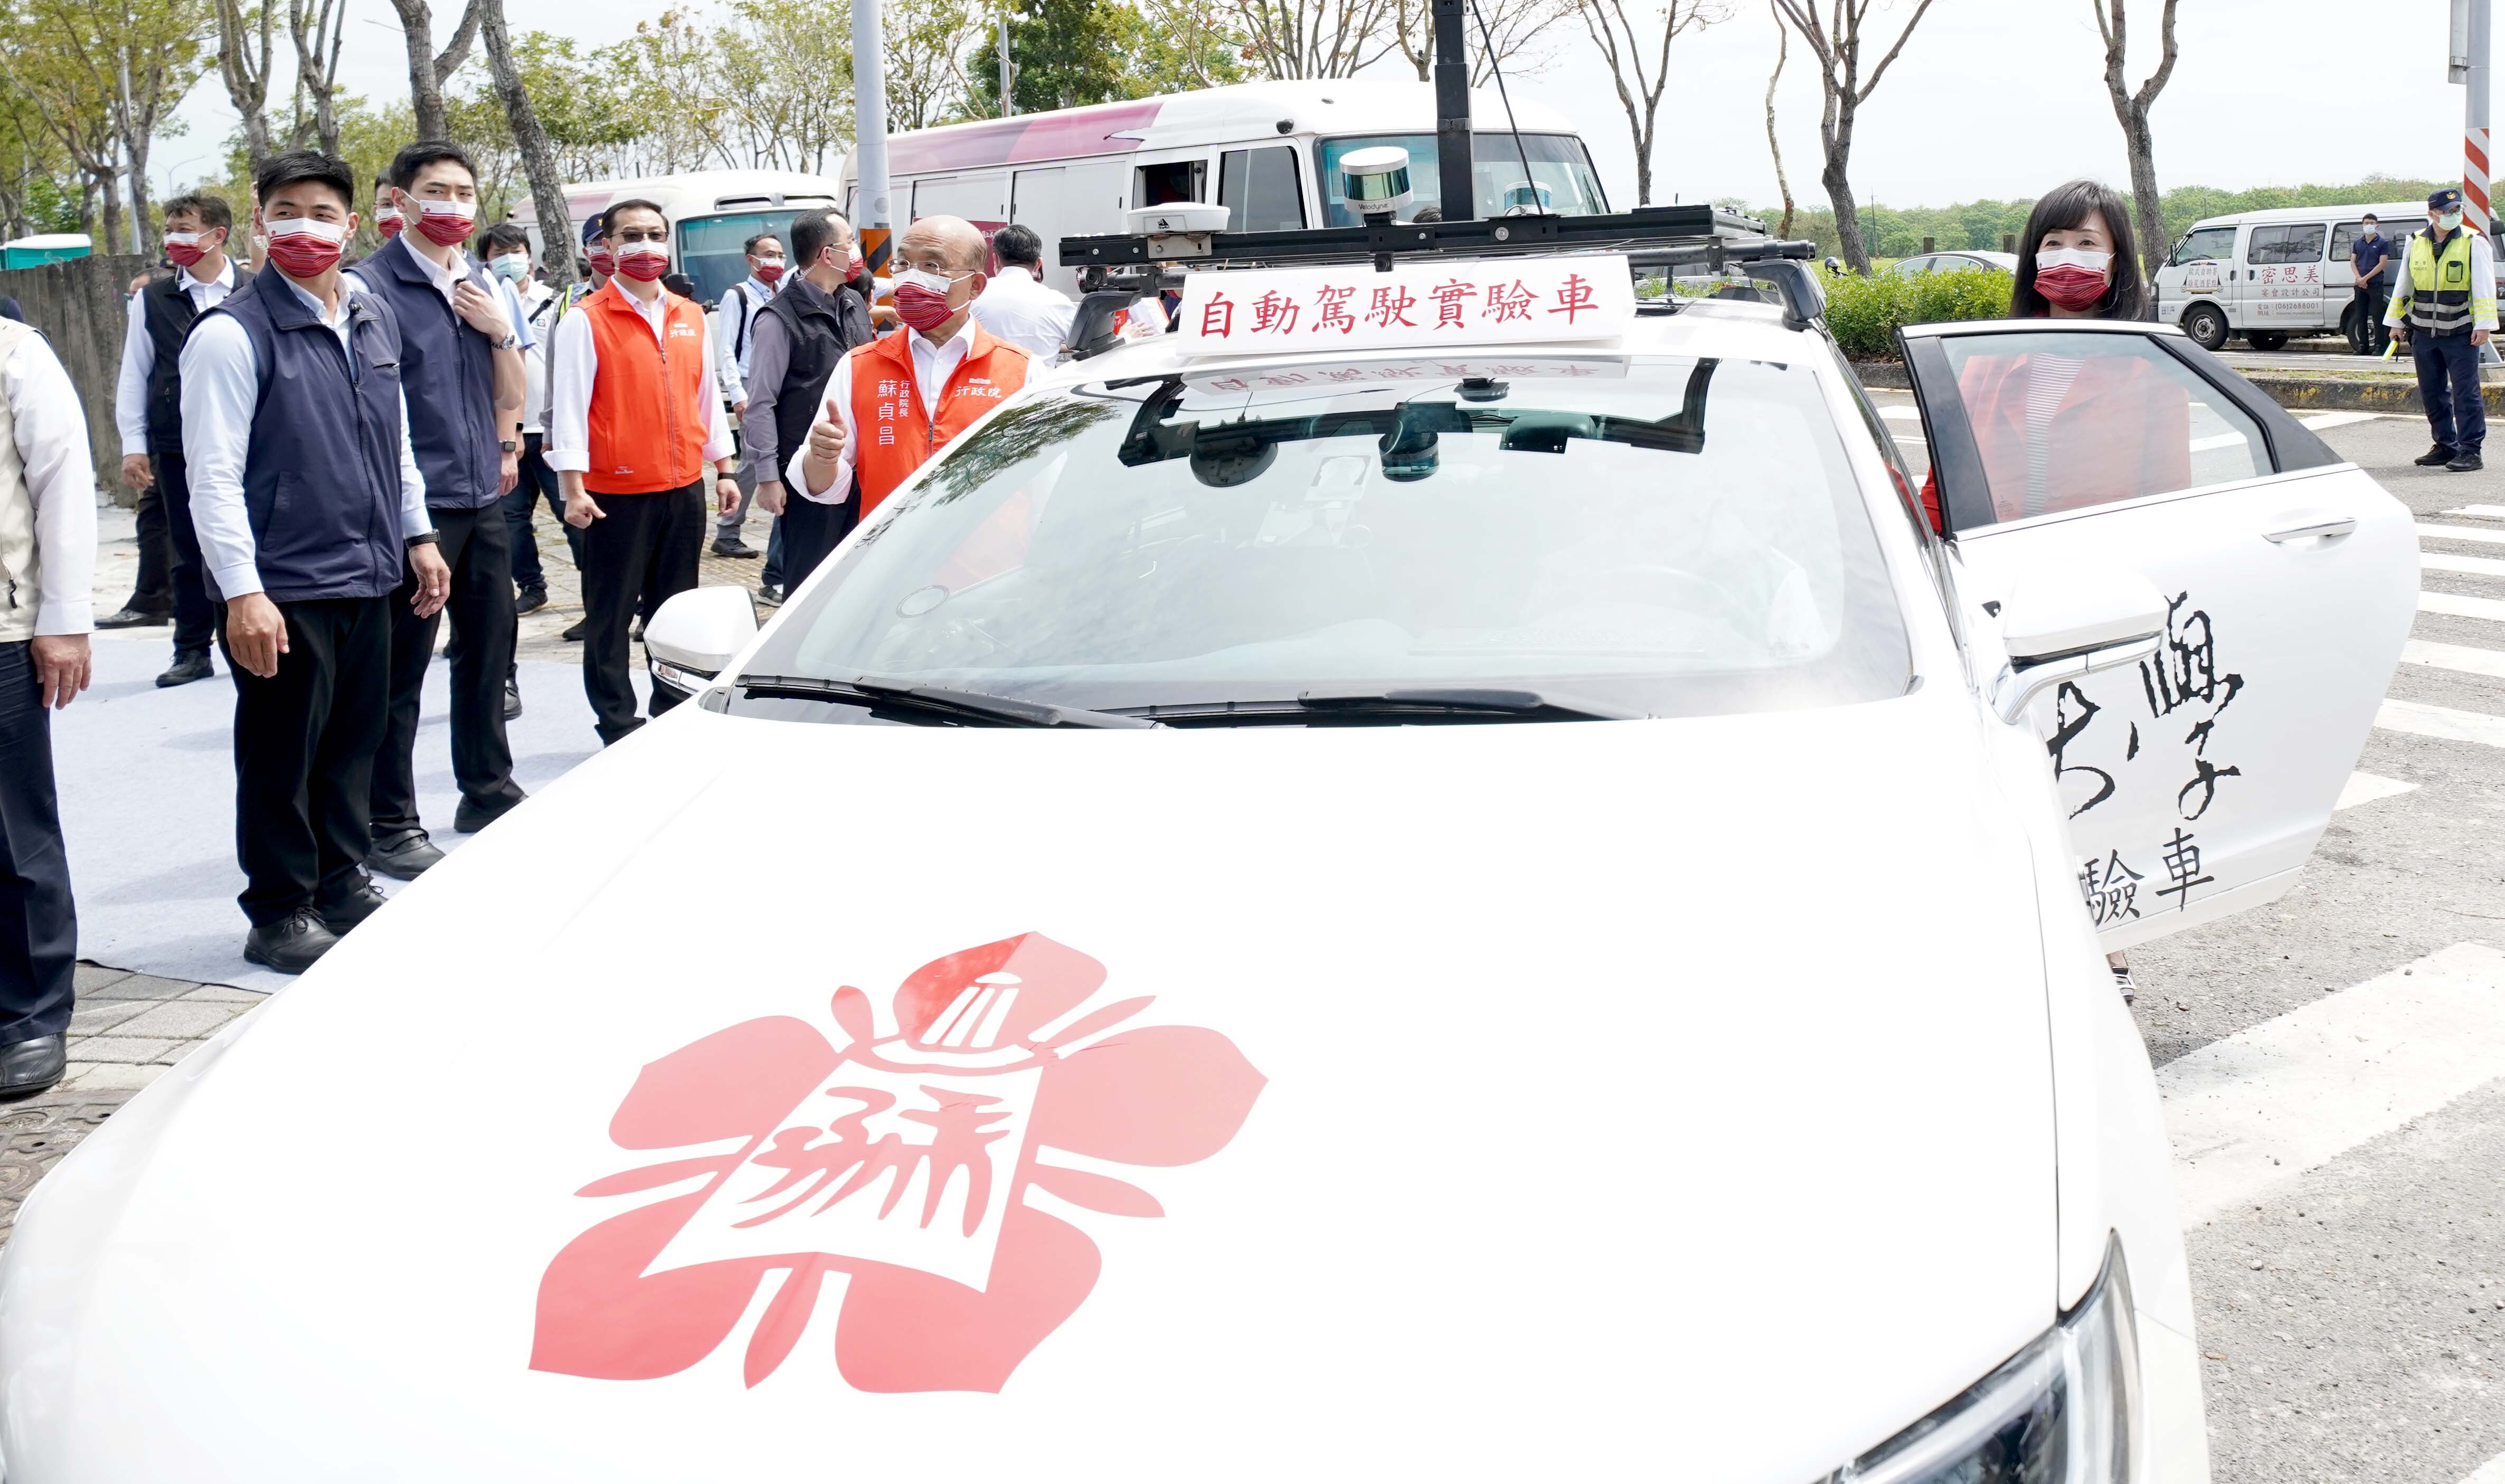 Site tour on the self-drive car empowered by NCKU and the Shalun self-driving testing laboratory